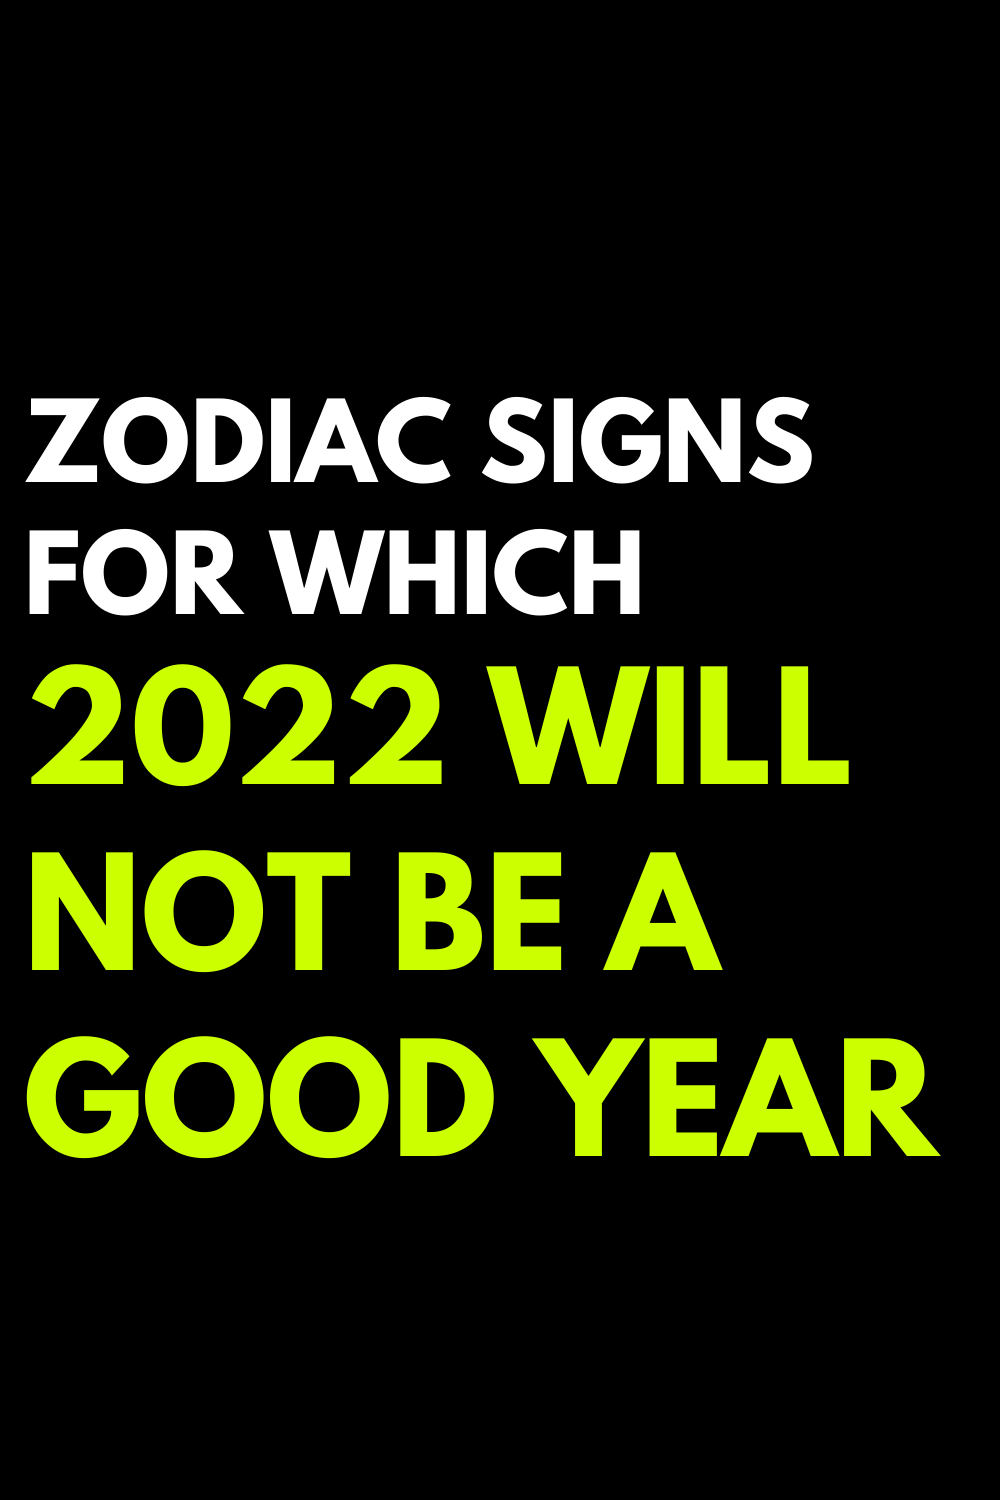 Zodiac signs for which 2022 will not be a good year